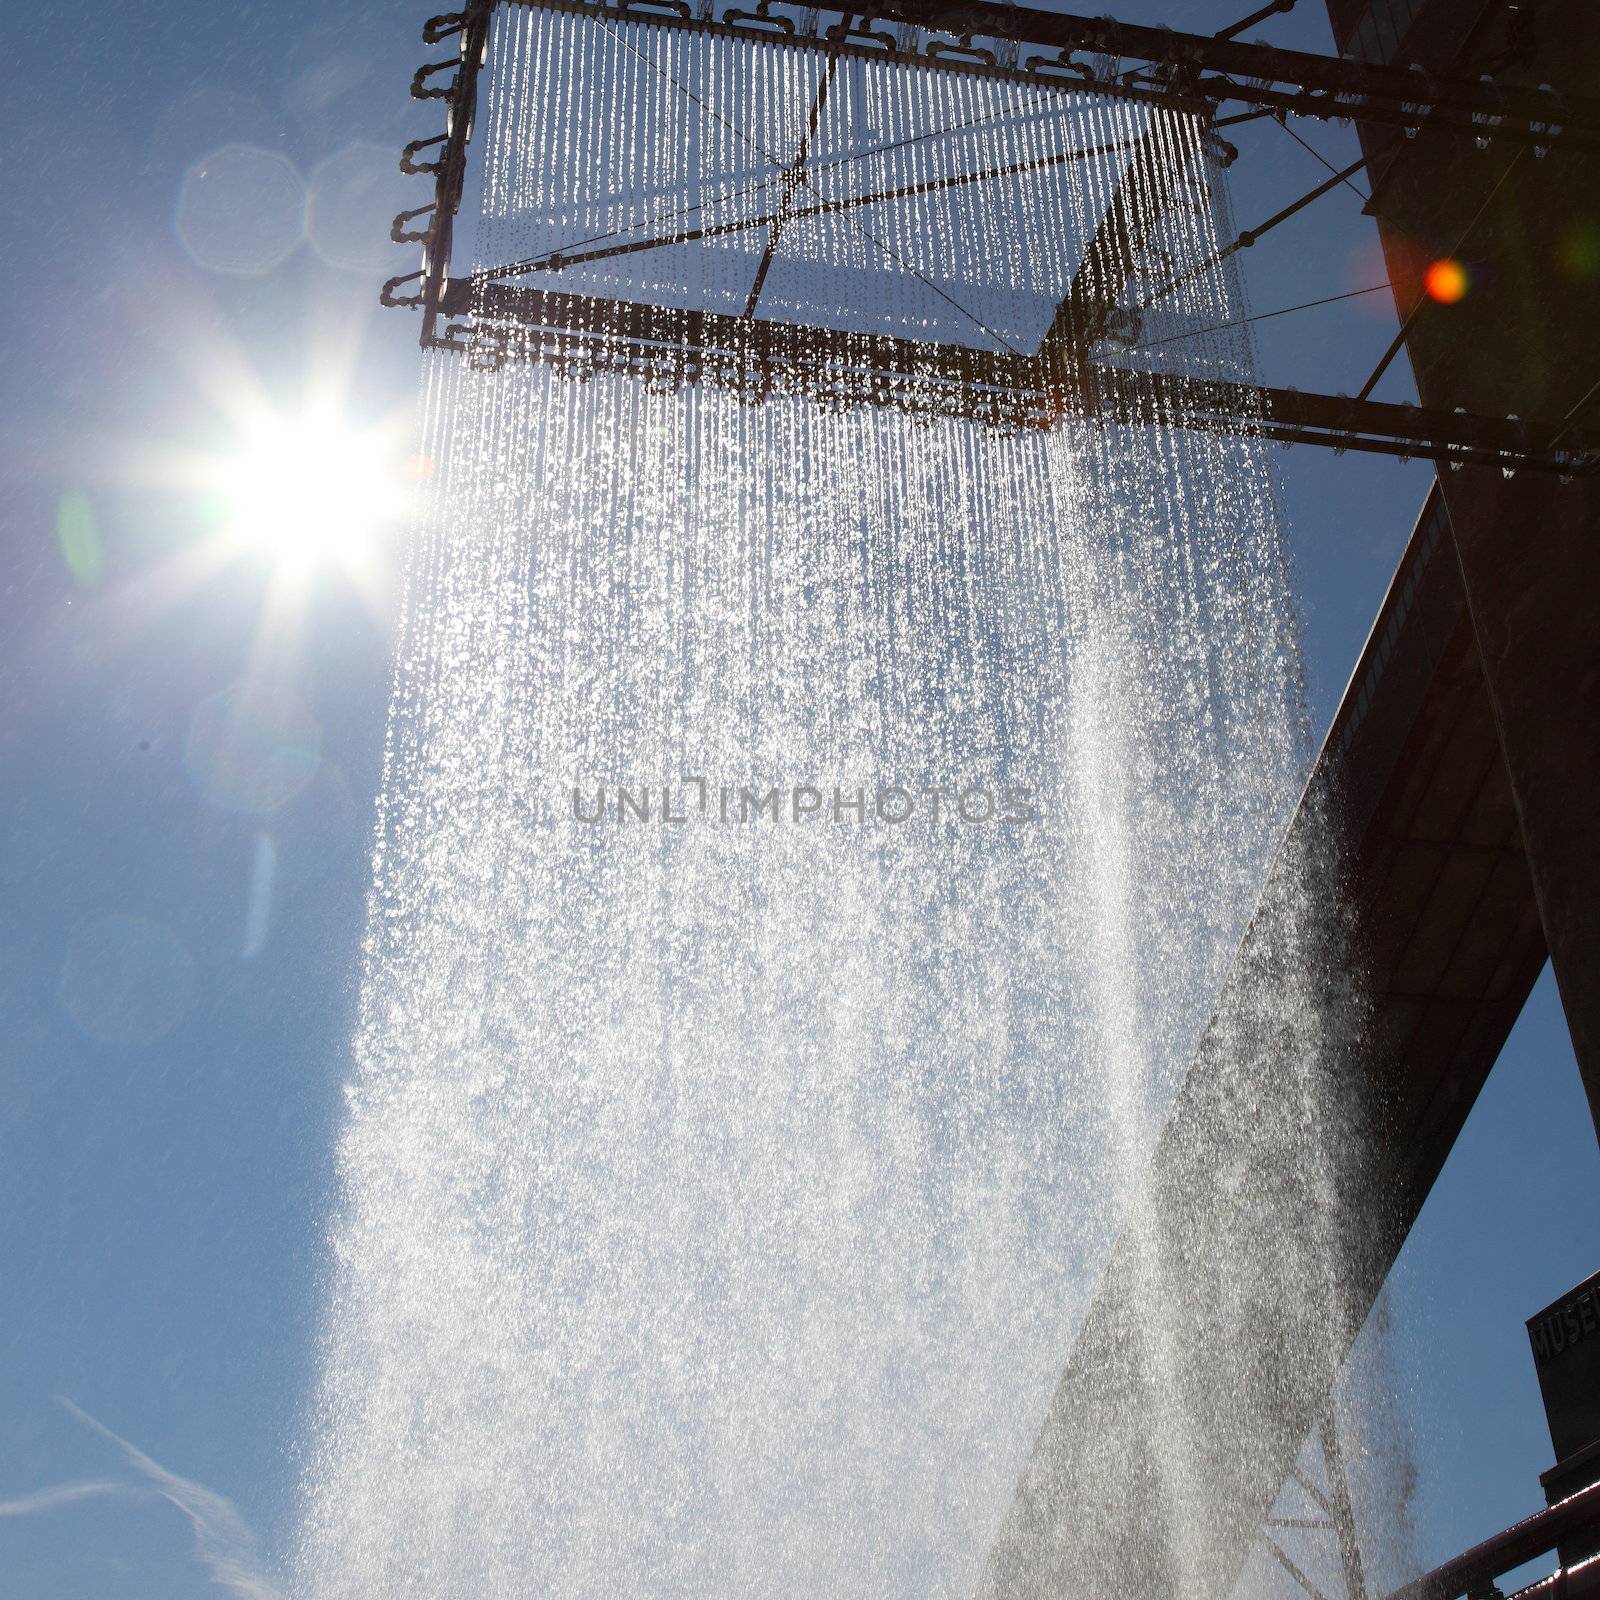 Decorative curtain of falling water on the exterior of a building or structure sparkling in the hot rays of the sun